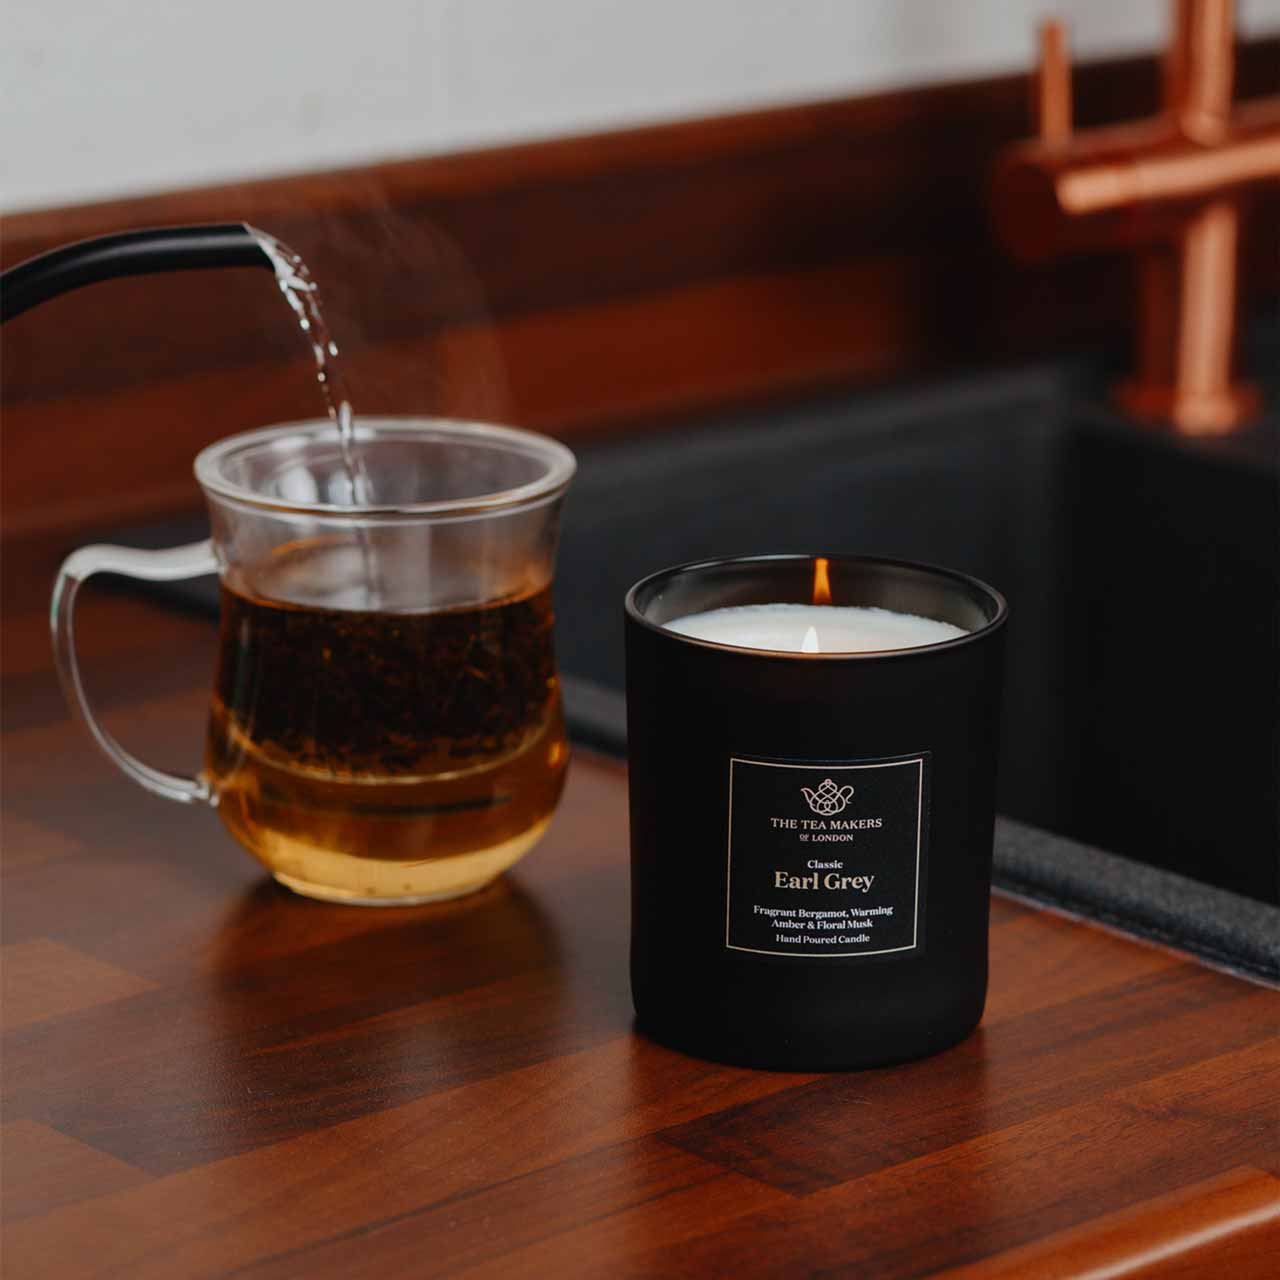 Classic Earl Grey Candle